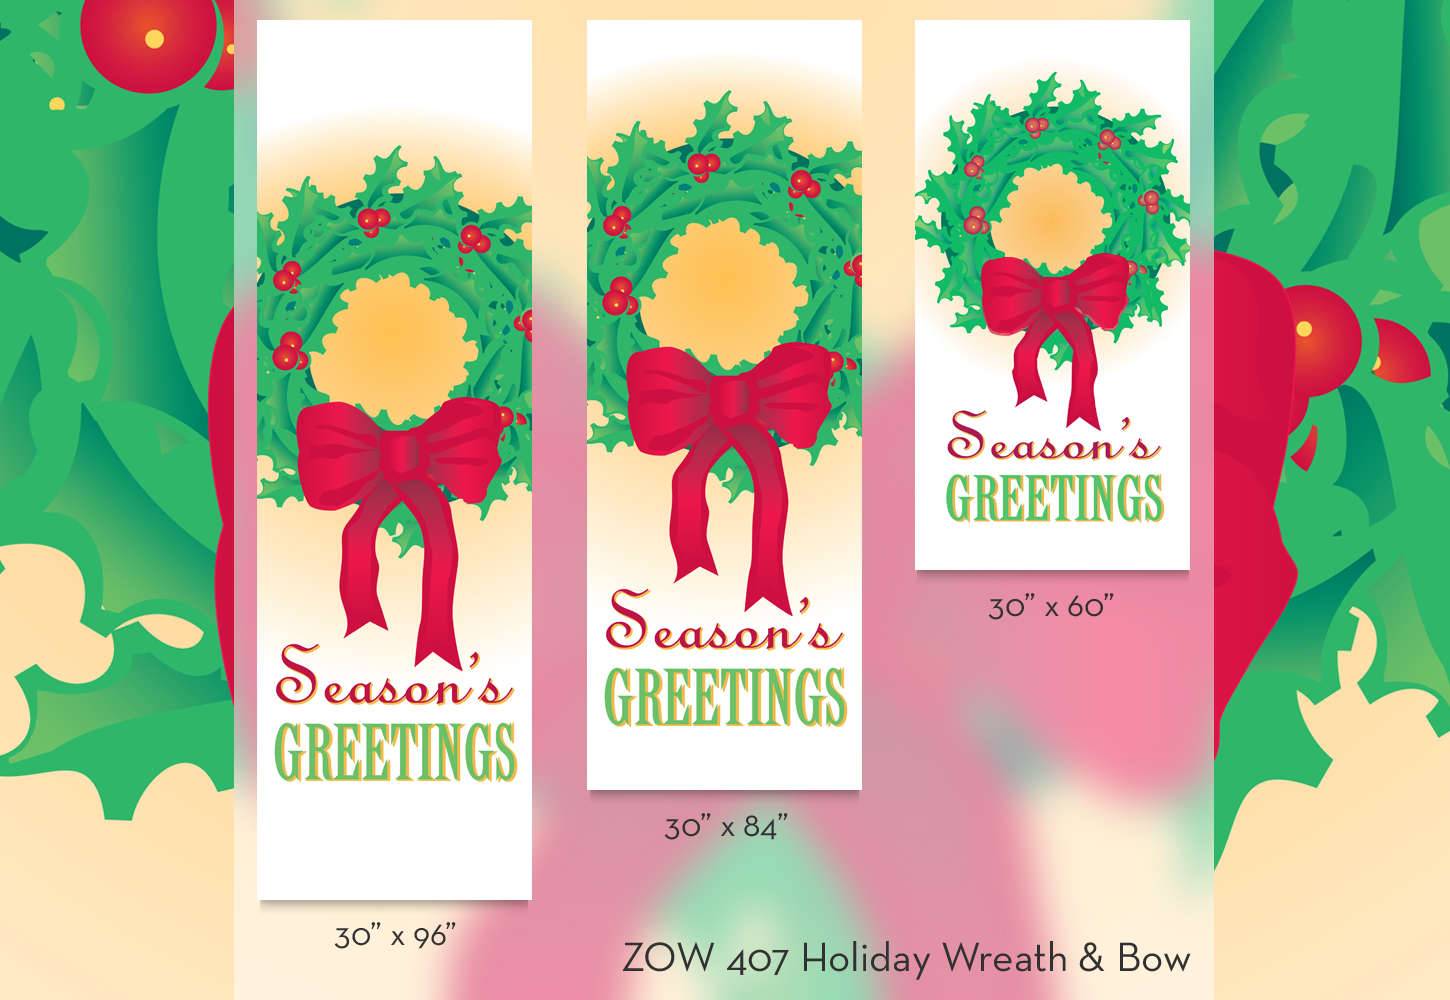 ZOW 407 Holiday Wreath & Bow